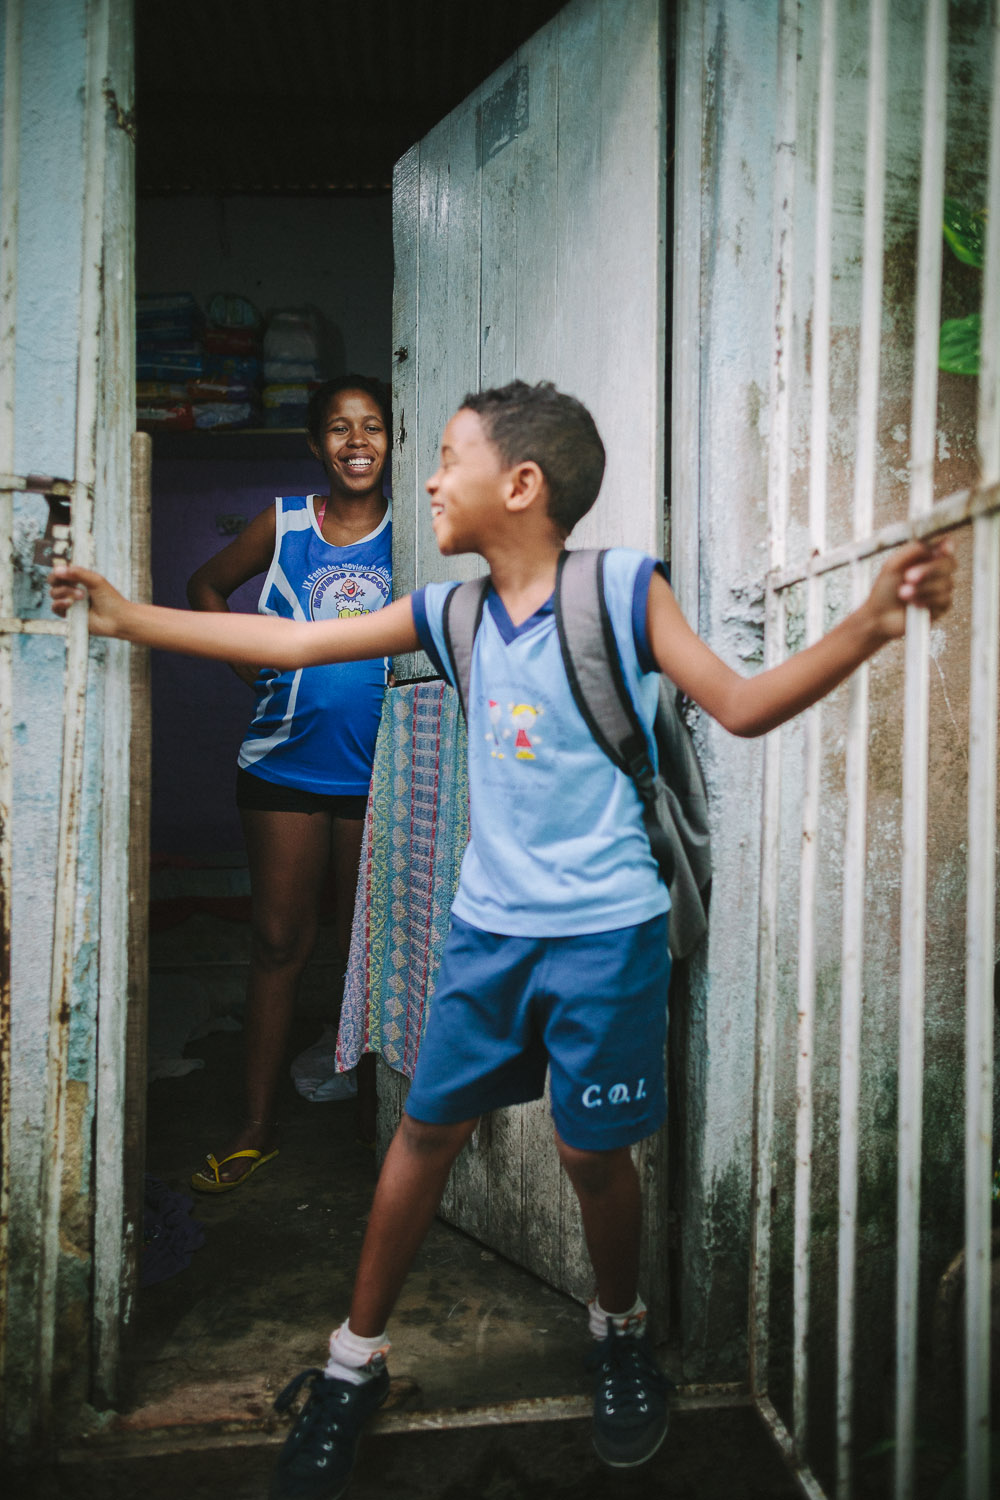   Before leaving home, he always turns to his mother and asks her blessing to keep him safe. Emidio's entire house (housing 4 people---soon to be 5) is perhaps no larger than 8 feet by 10 feet. This is Emidio's morning routine before heading to class